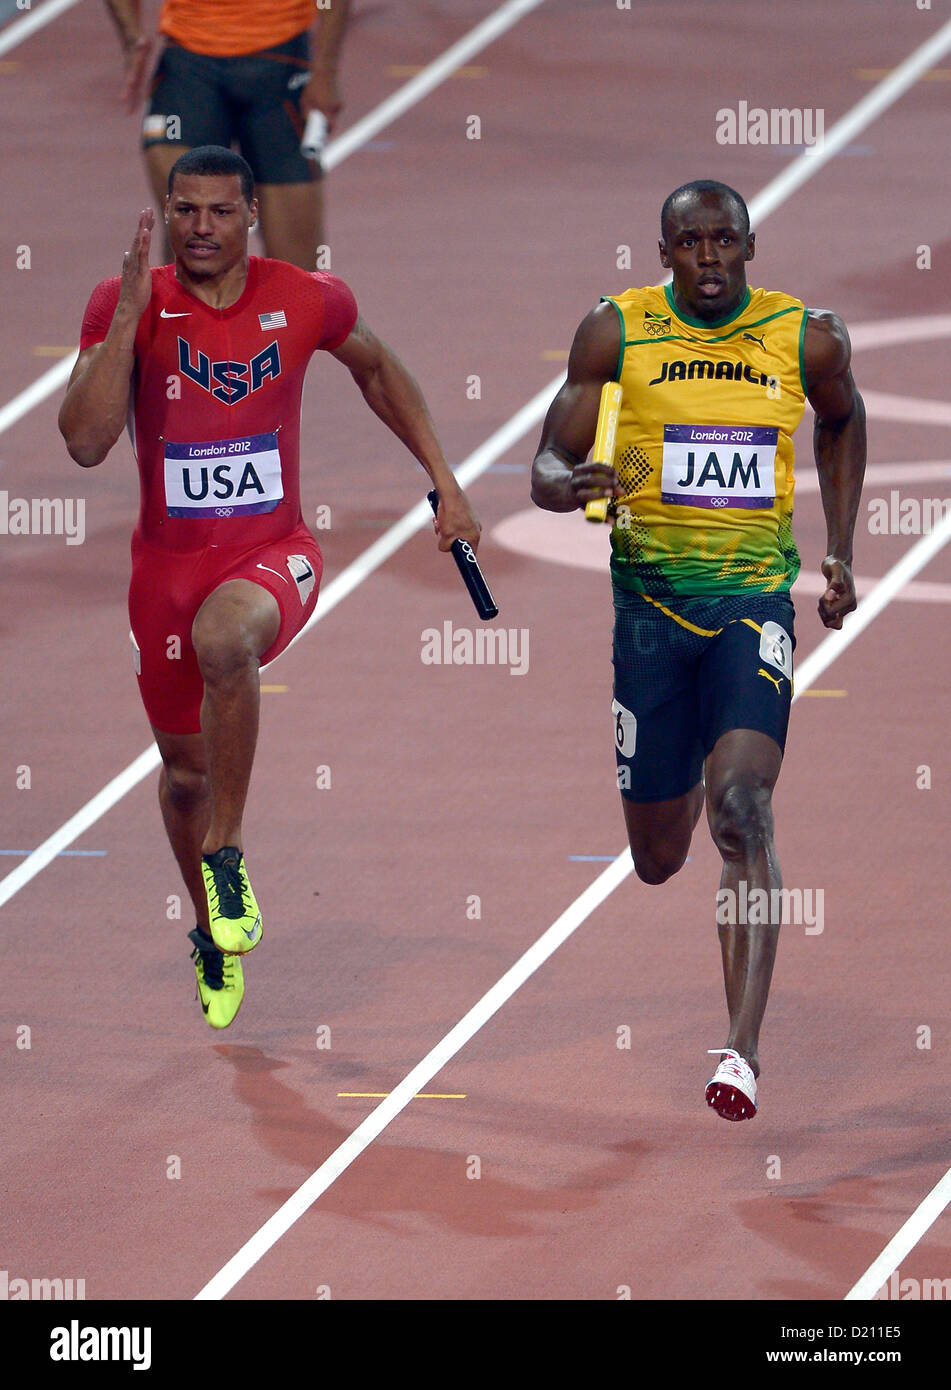 Jamaica's Usain Bolt (right) battles it out with USA's Ryan Bailey. Athletics Stock Photo